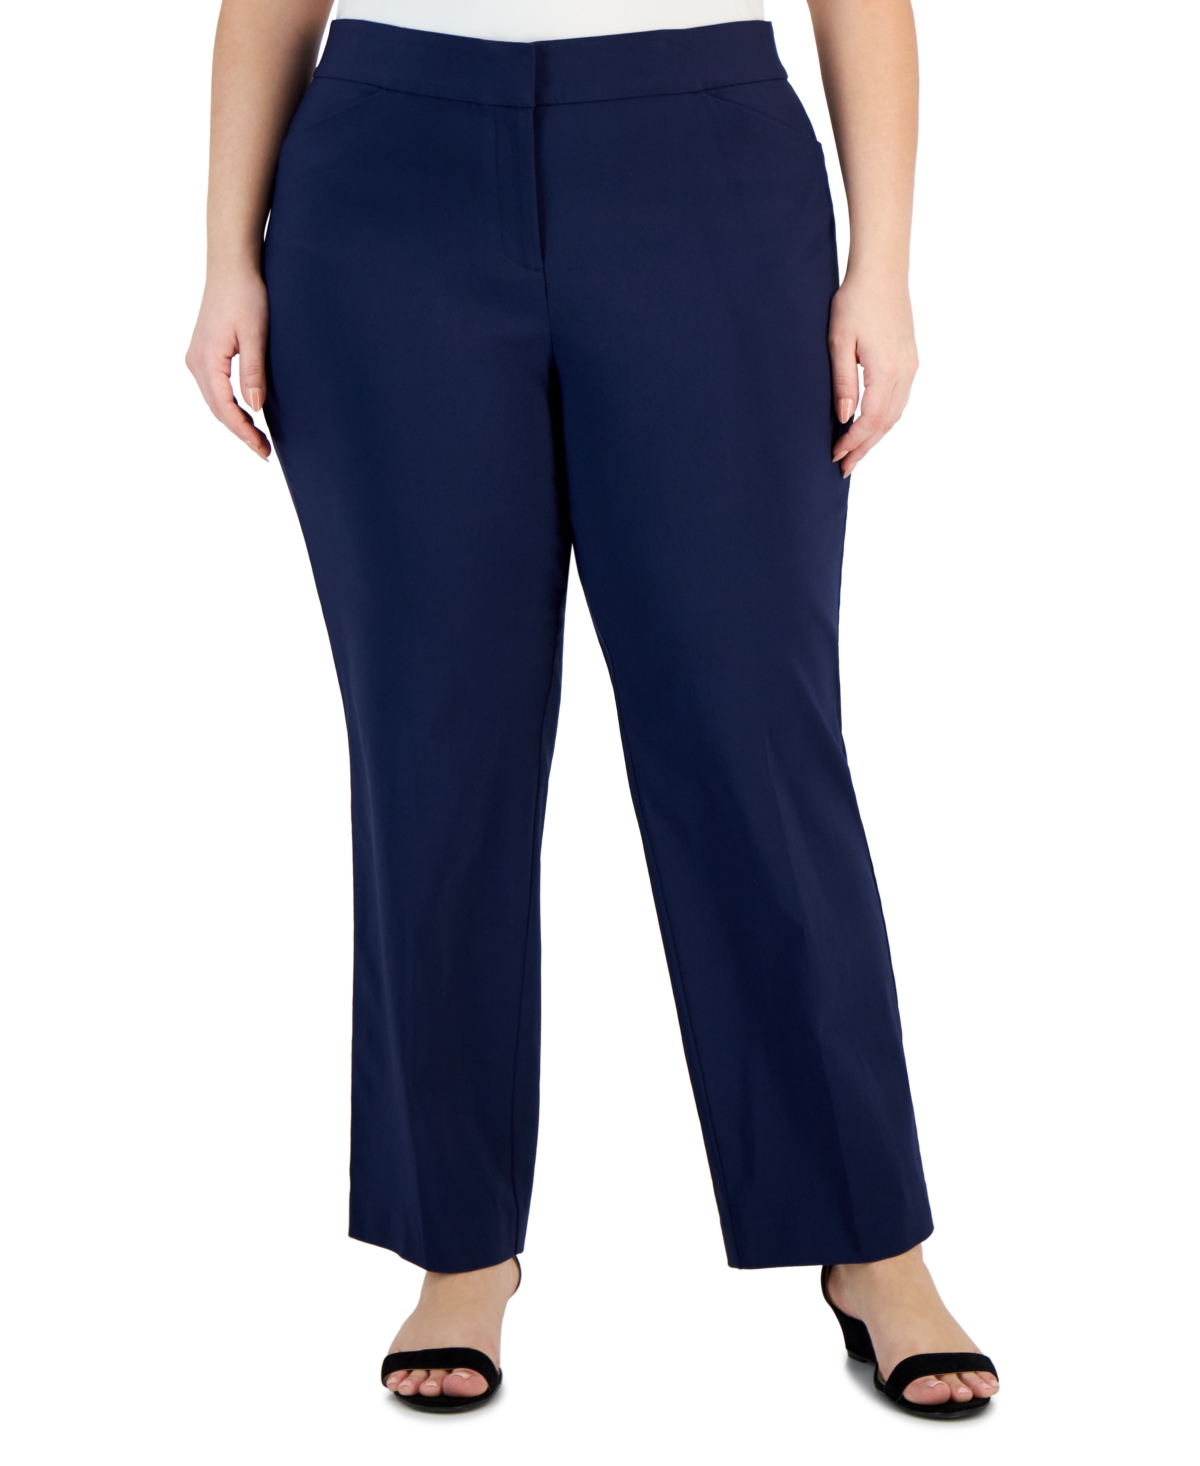 Plus Size Curvy-Fit Straight-Leg Pants, Created for Macy's - Intrepid Blue